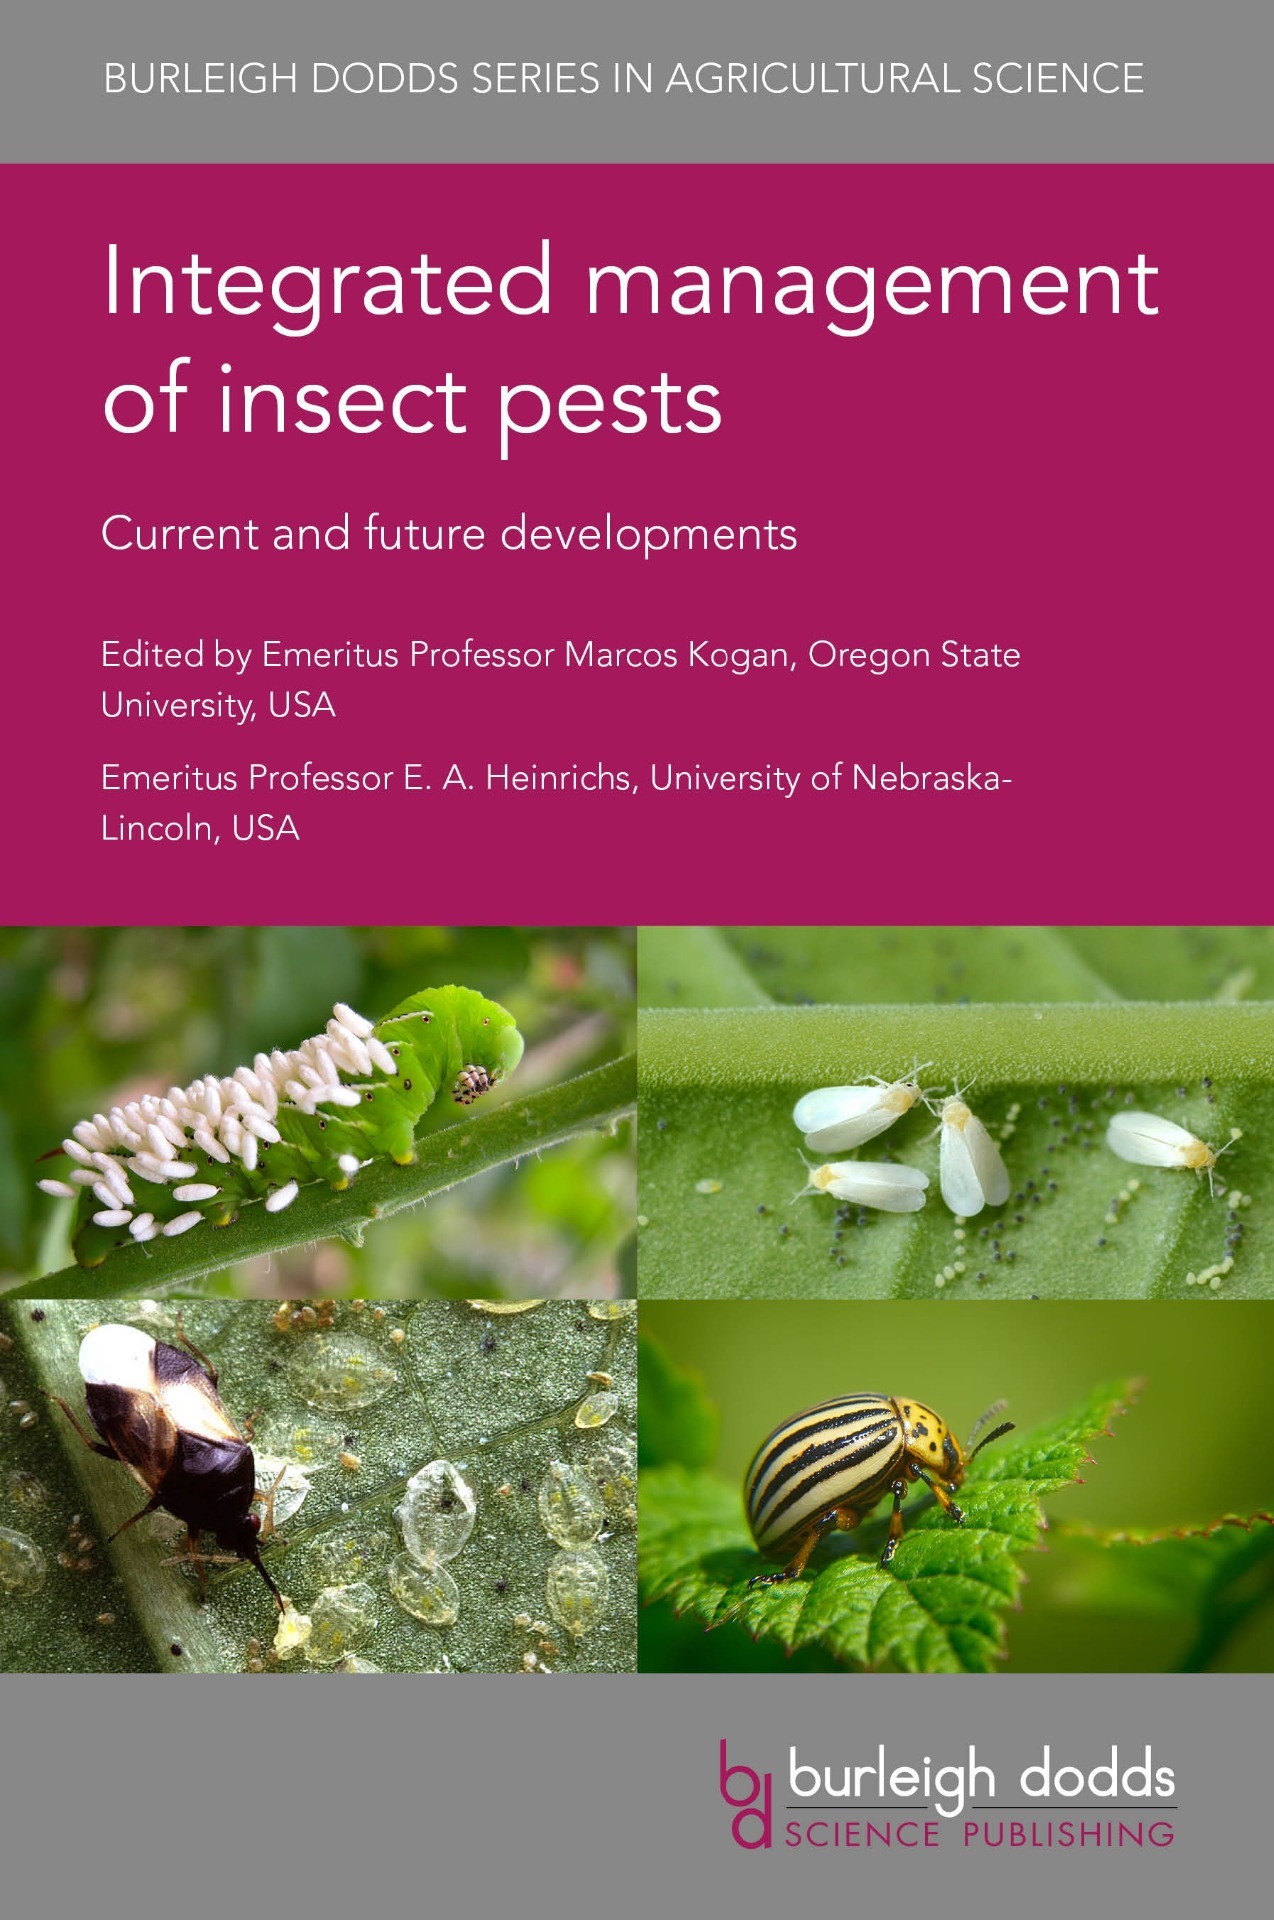 Integrated management of insect pests: Current and future developments